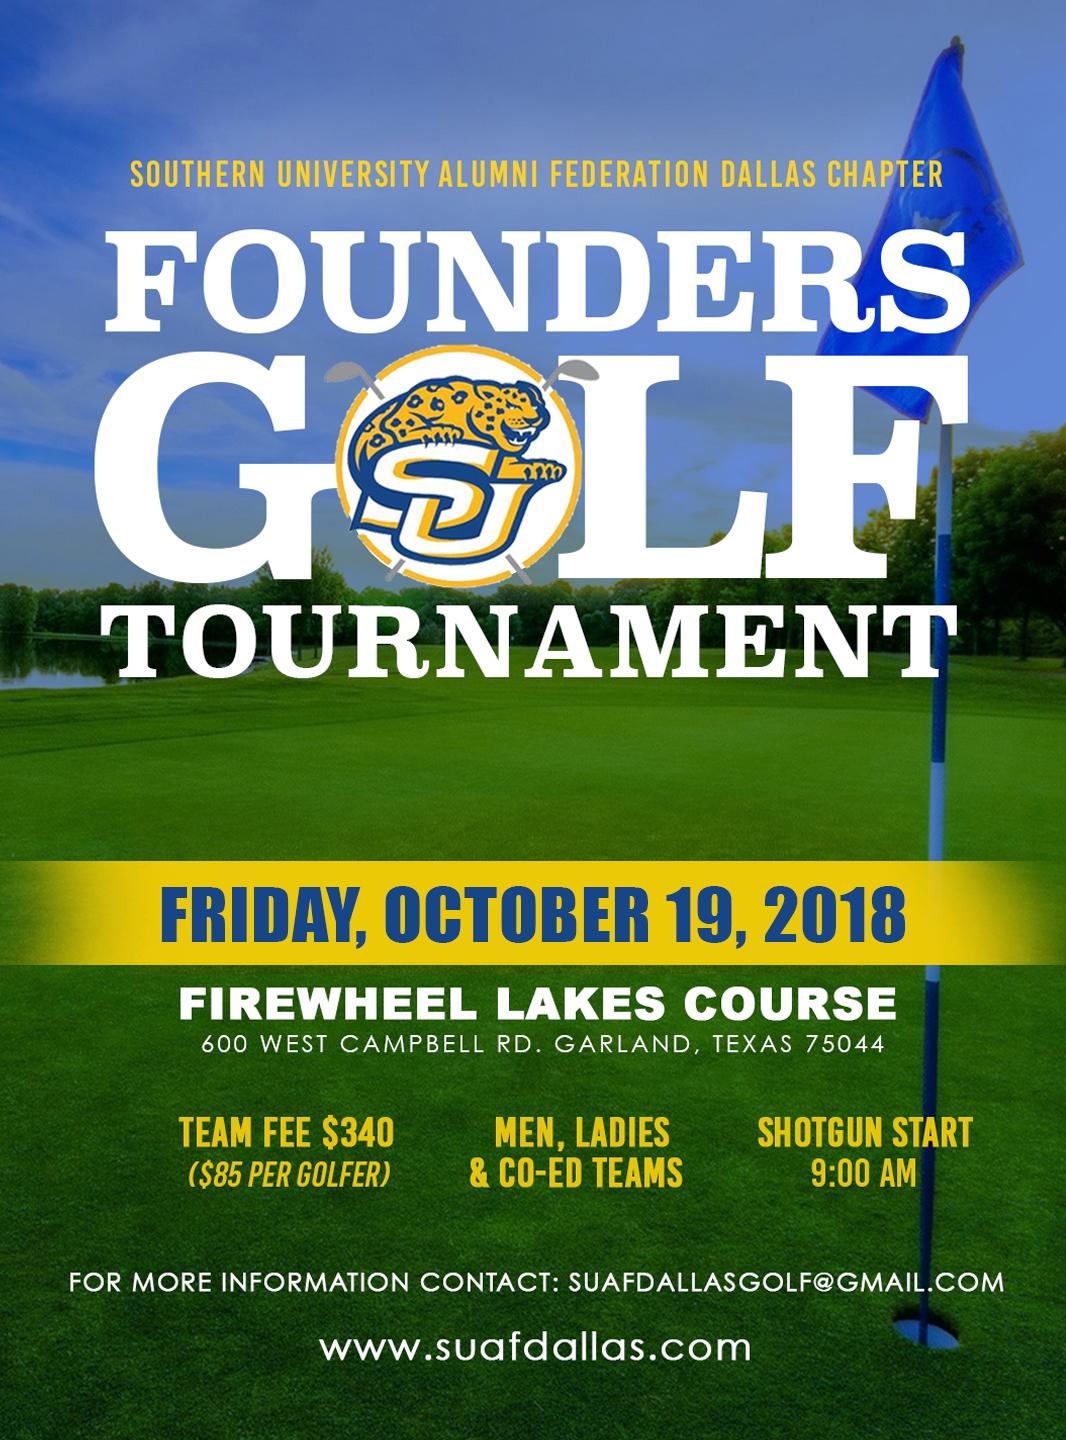 Southern University Dallas Chapter Founders' Golf Tournament